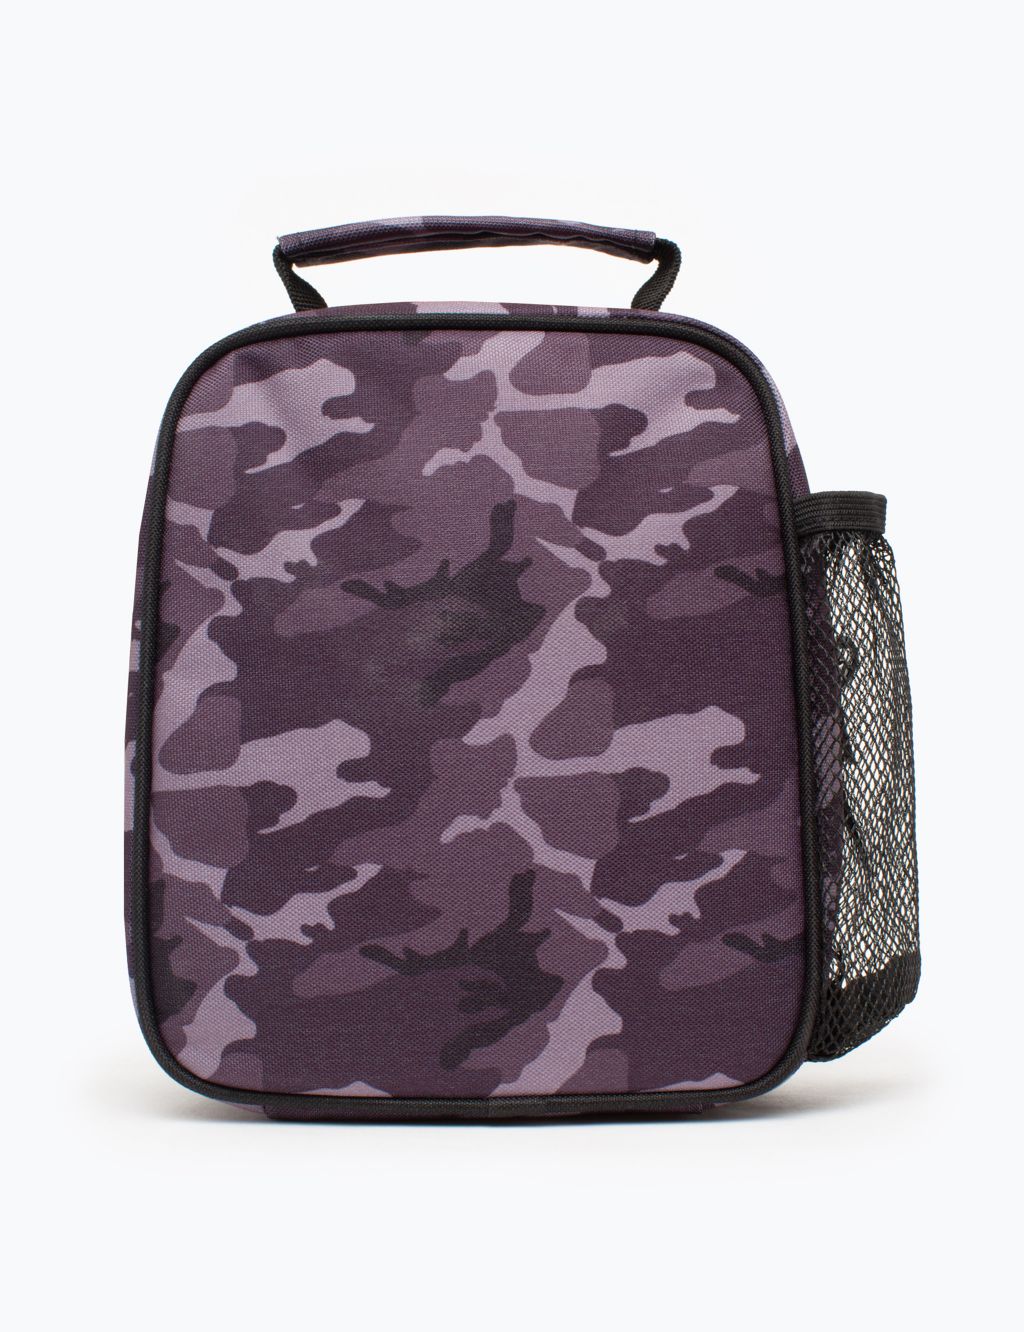 Kids' Camouflage Print Lunch Box image 6